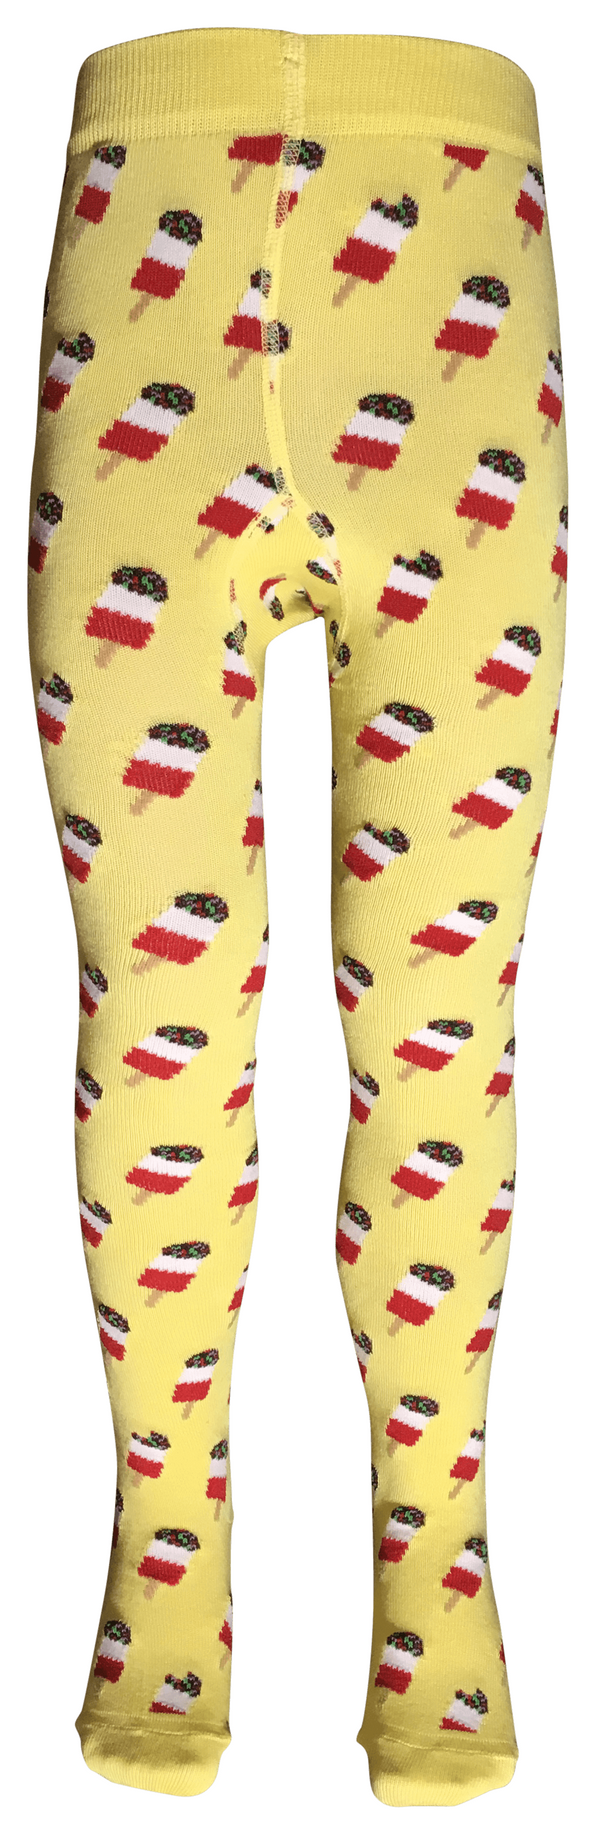 S & S Tights - Lollicky